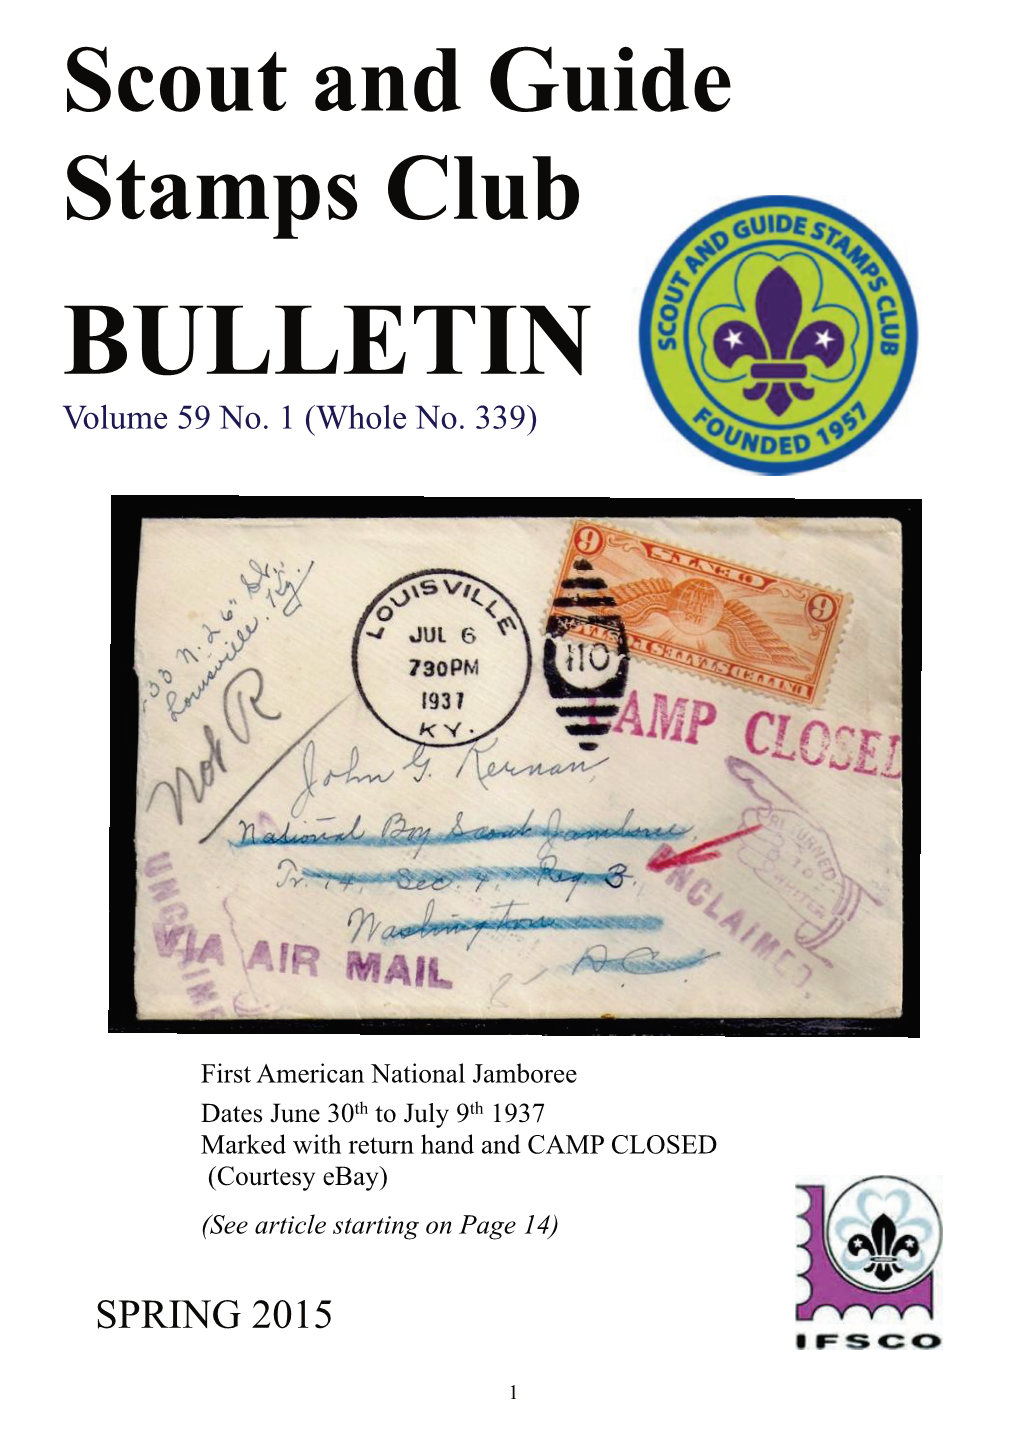 Scout and Guide Stamps Club BULLETIN #339